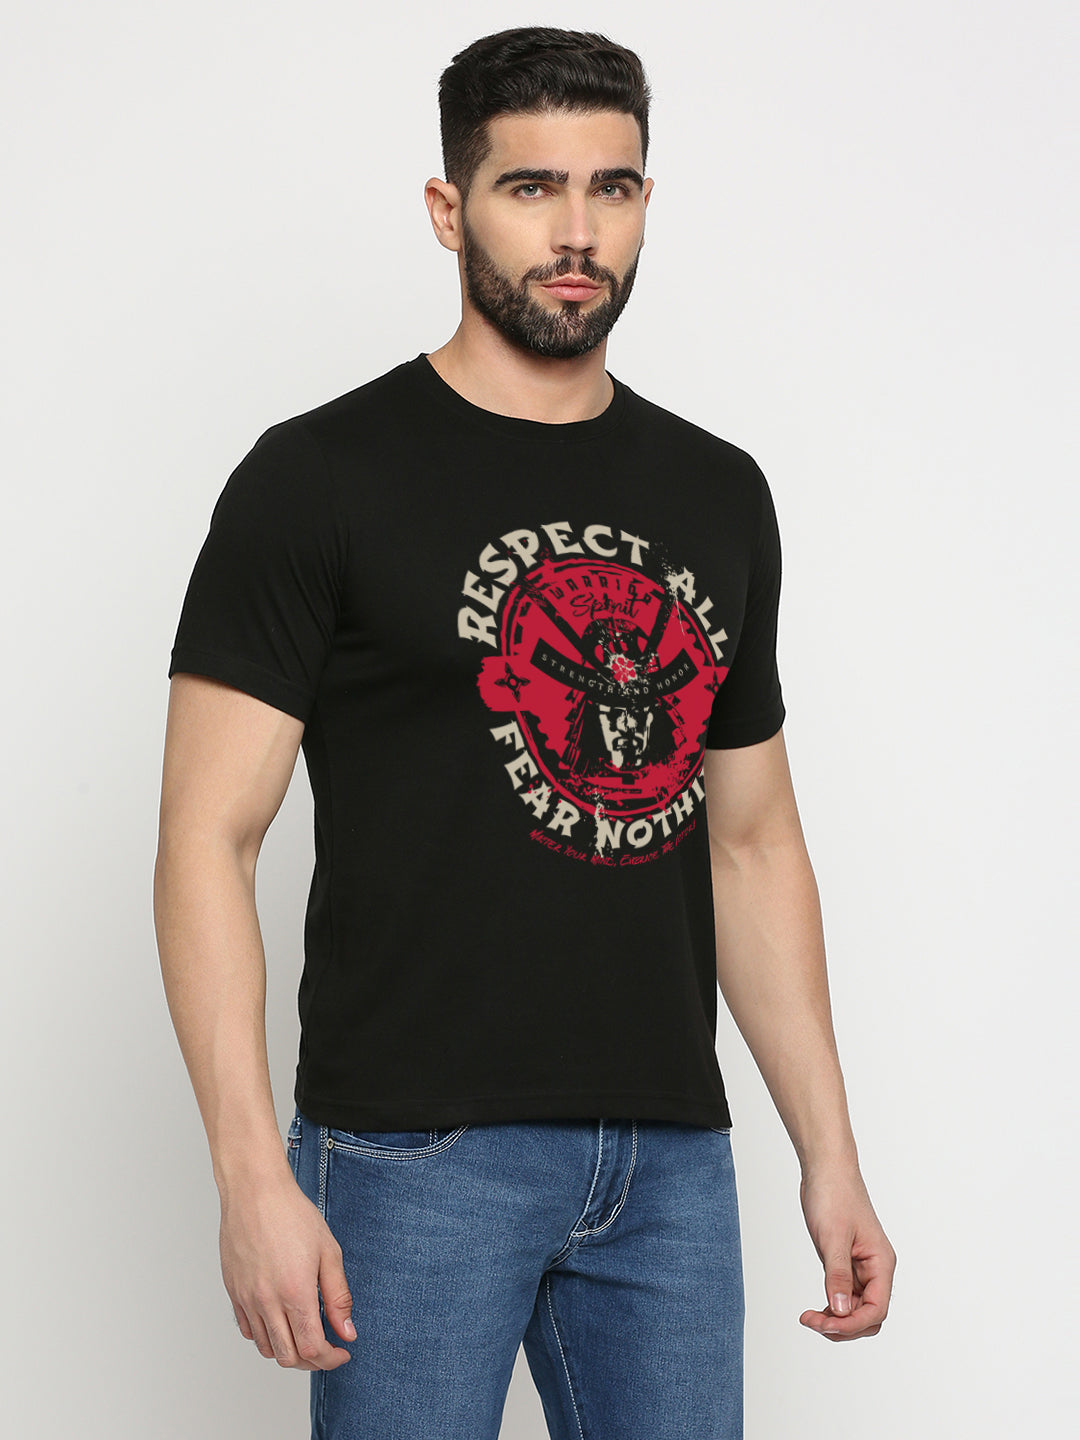 Respect All Fear Nothing T-Shirt